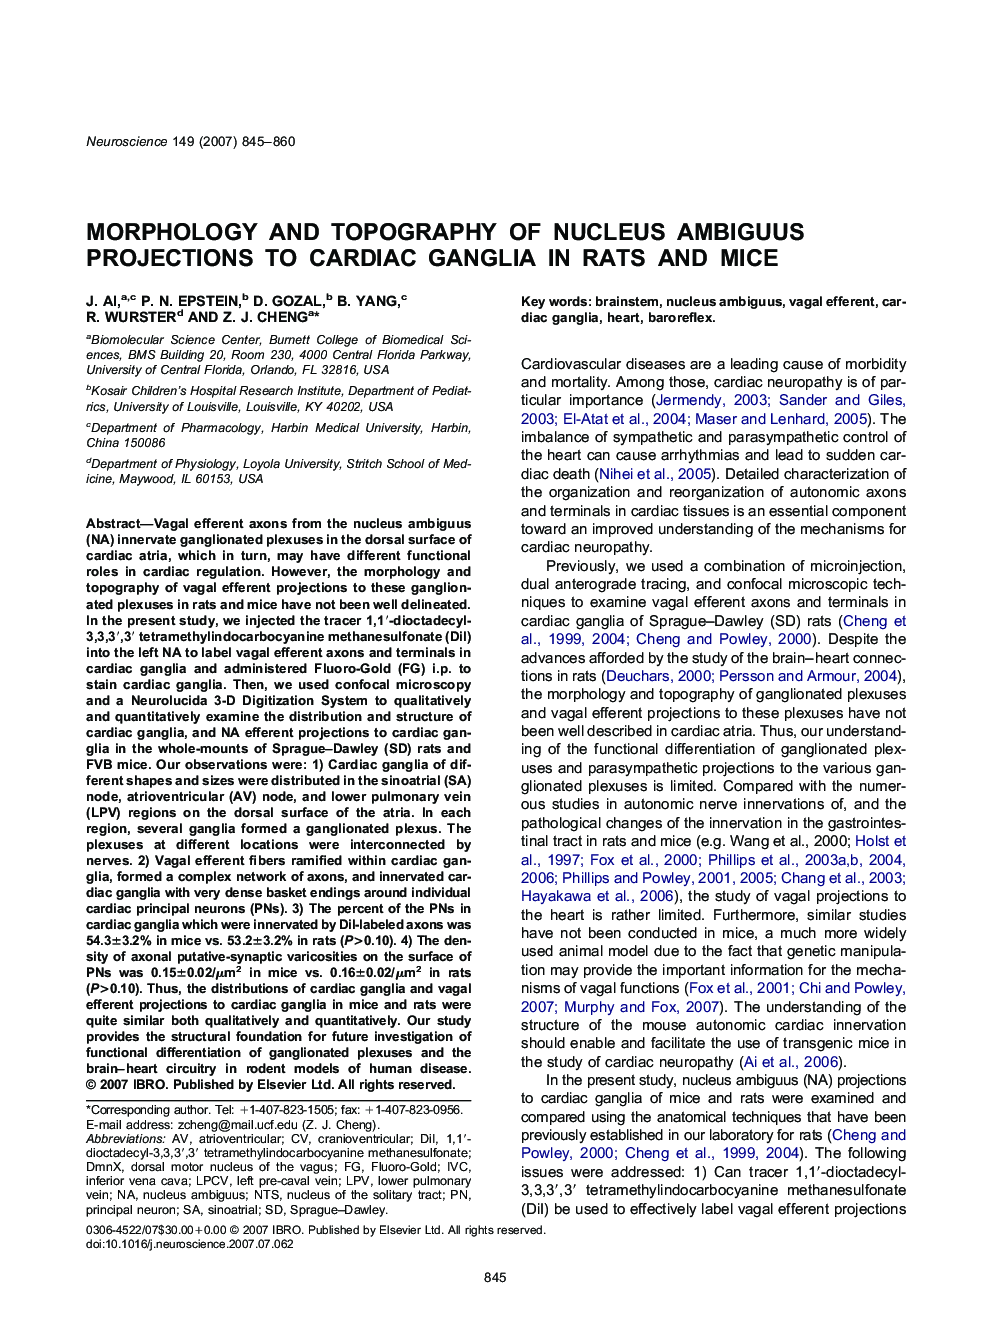 Morphology and topography of nucleus ambiguus projections to cardiac ganglia in rats and mice